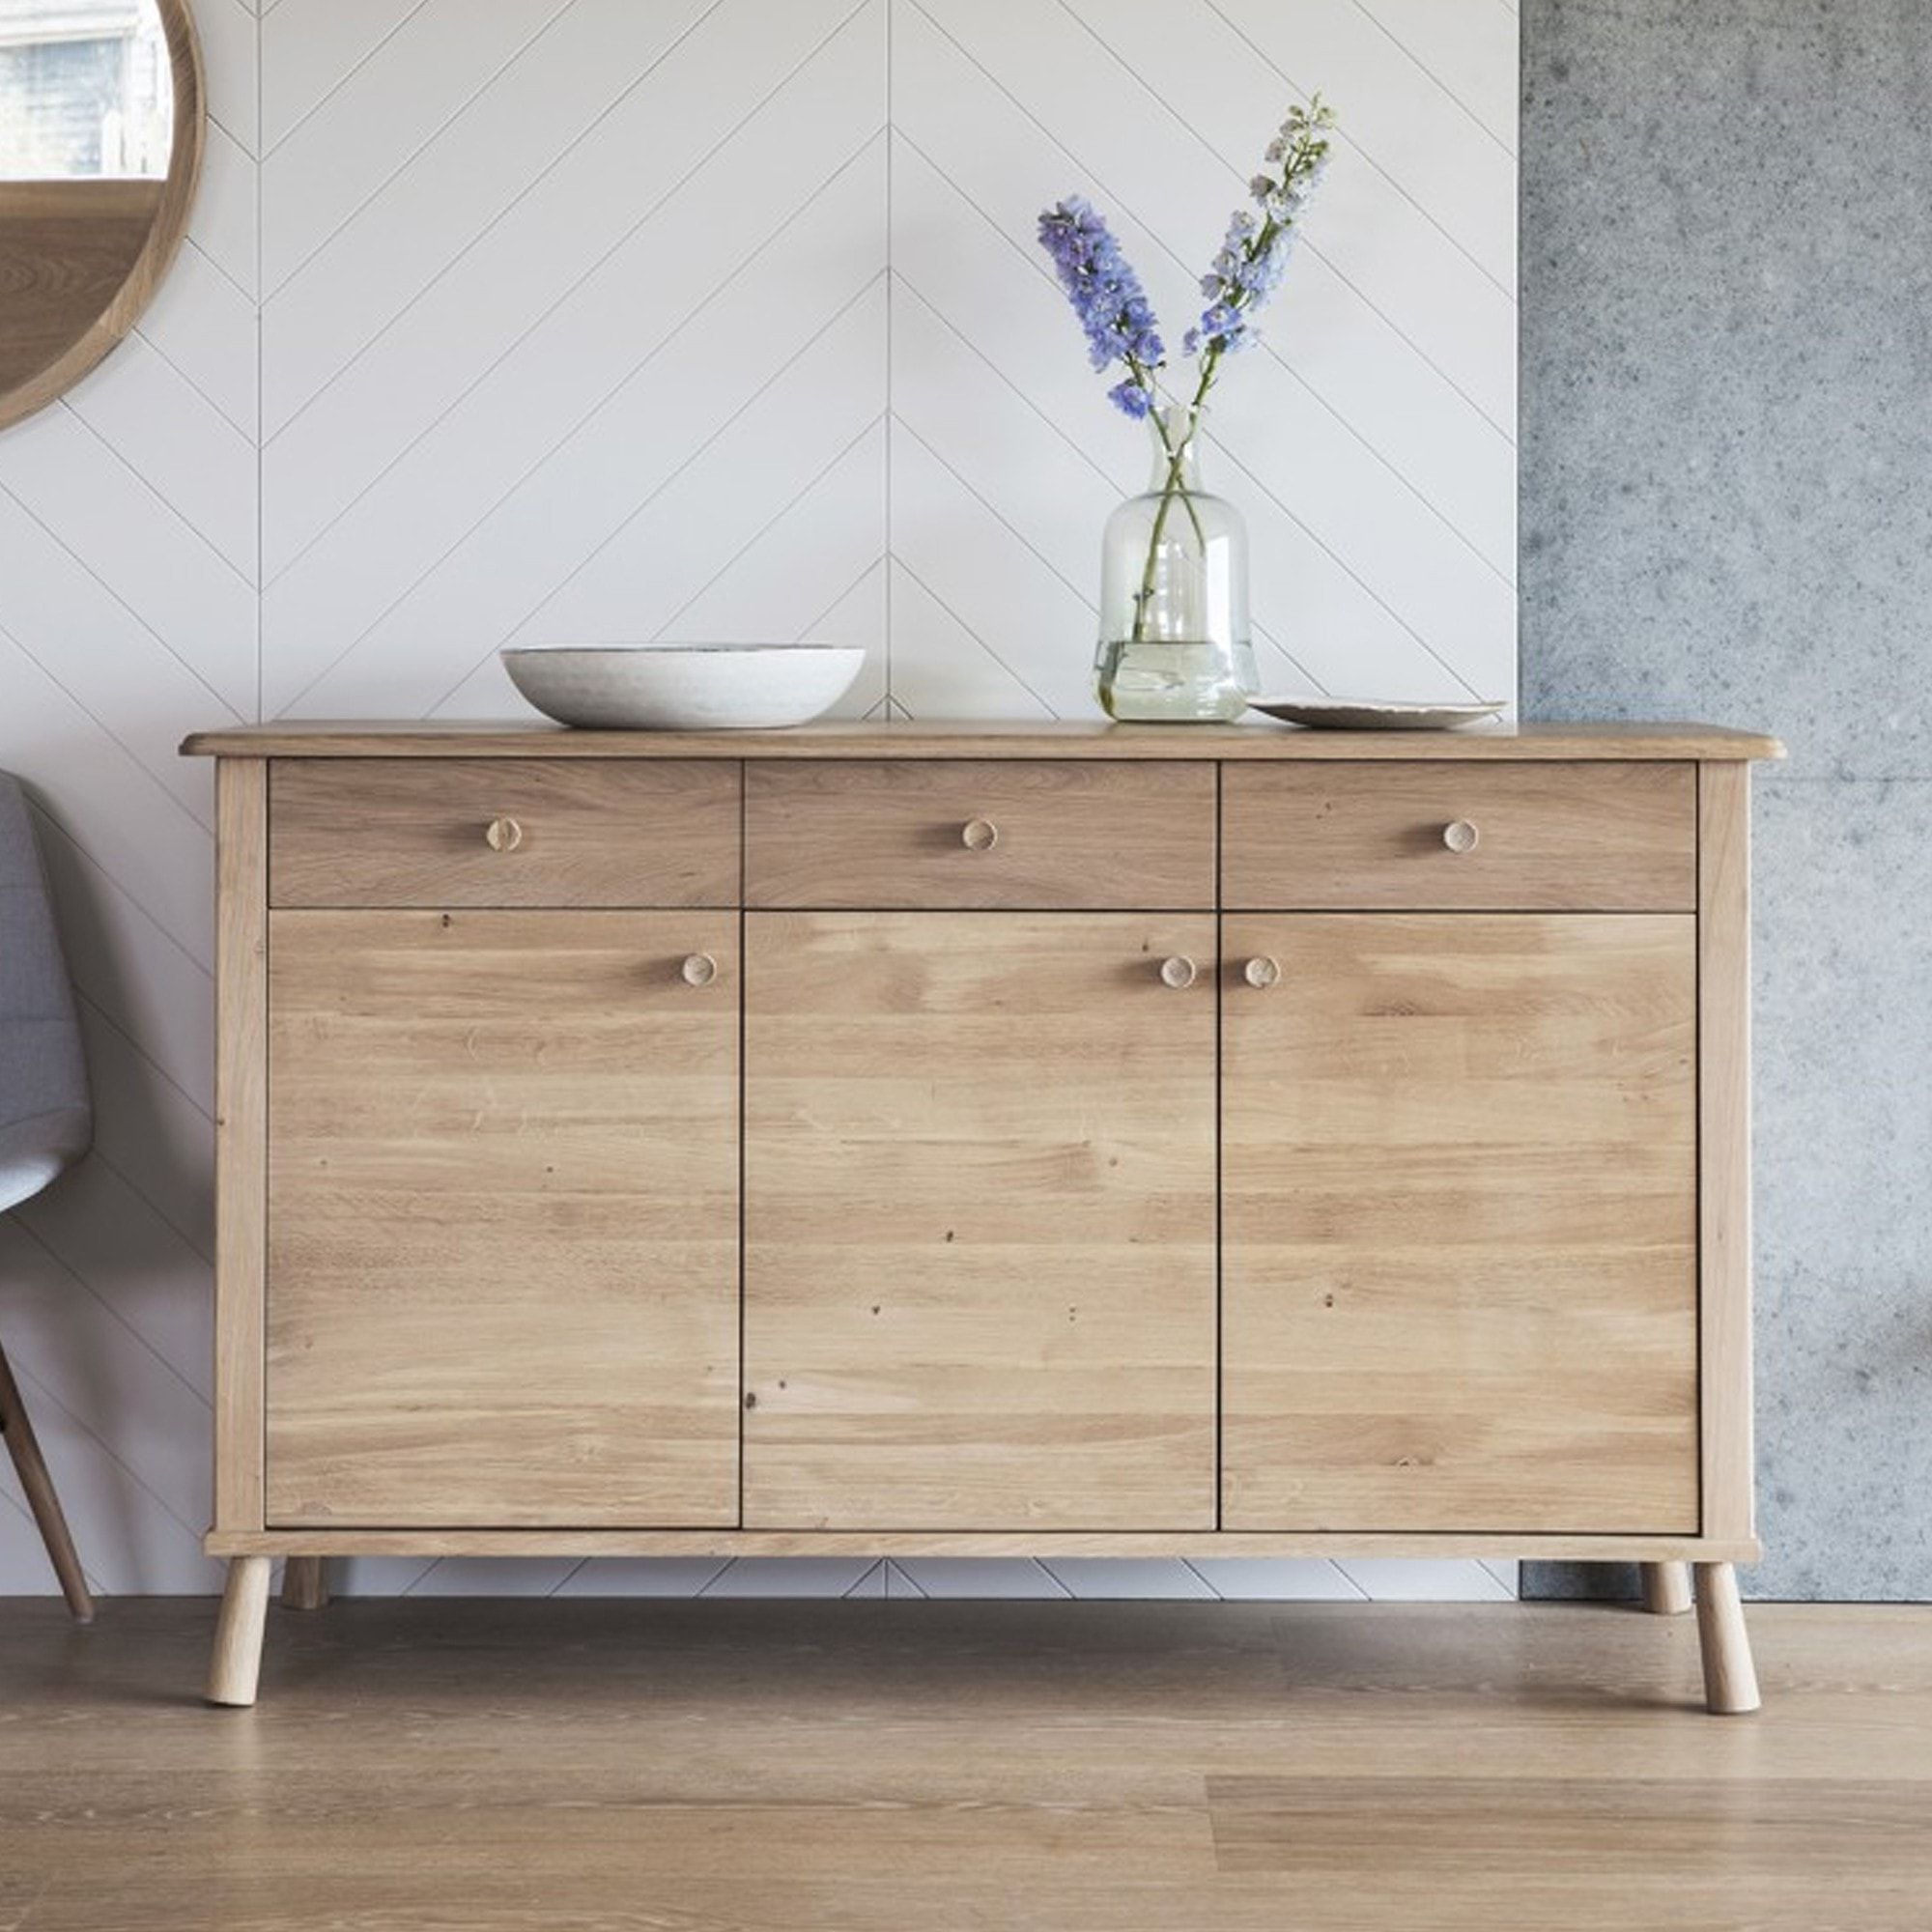 Wooden Sideboards With Storage (View 11 of 15)